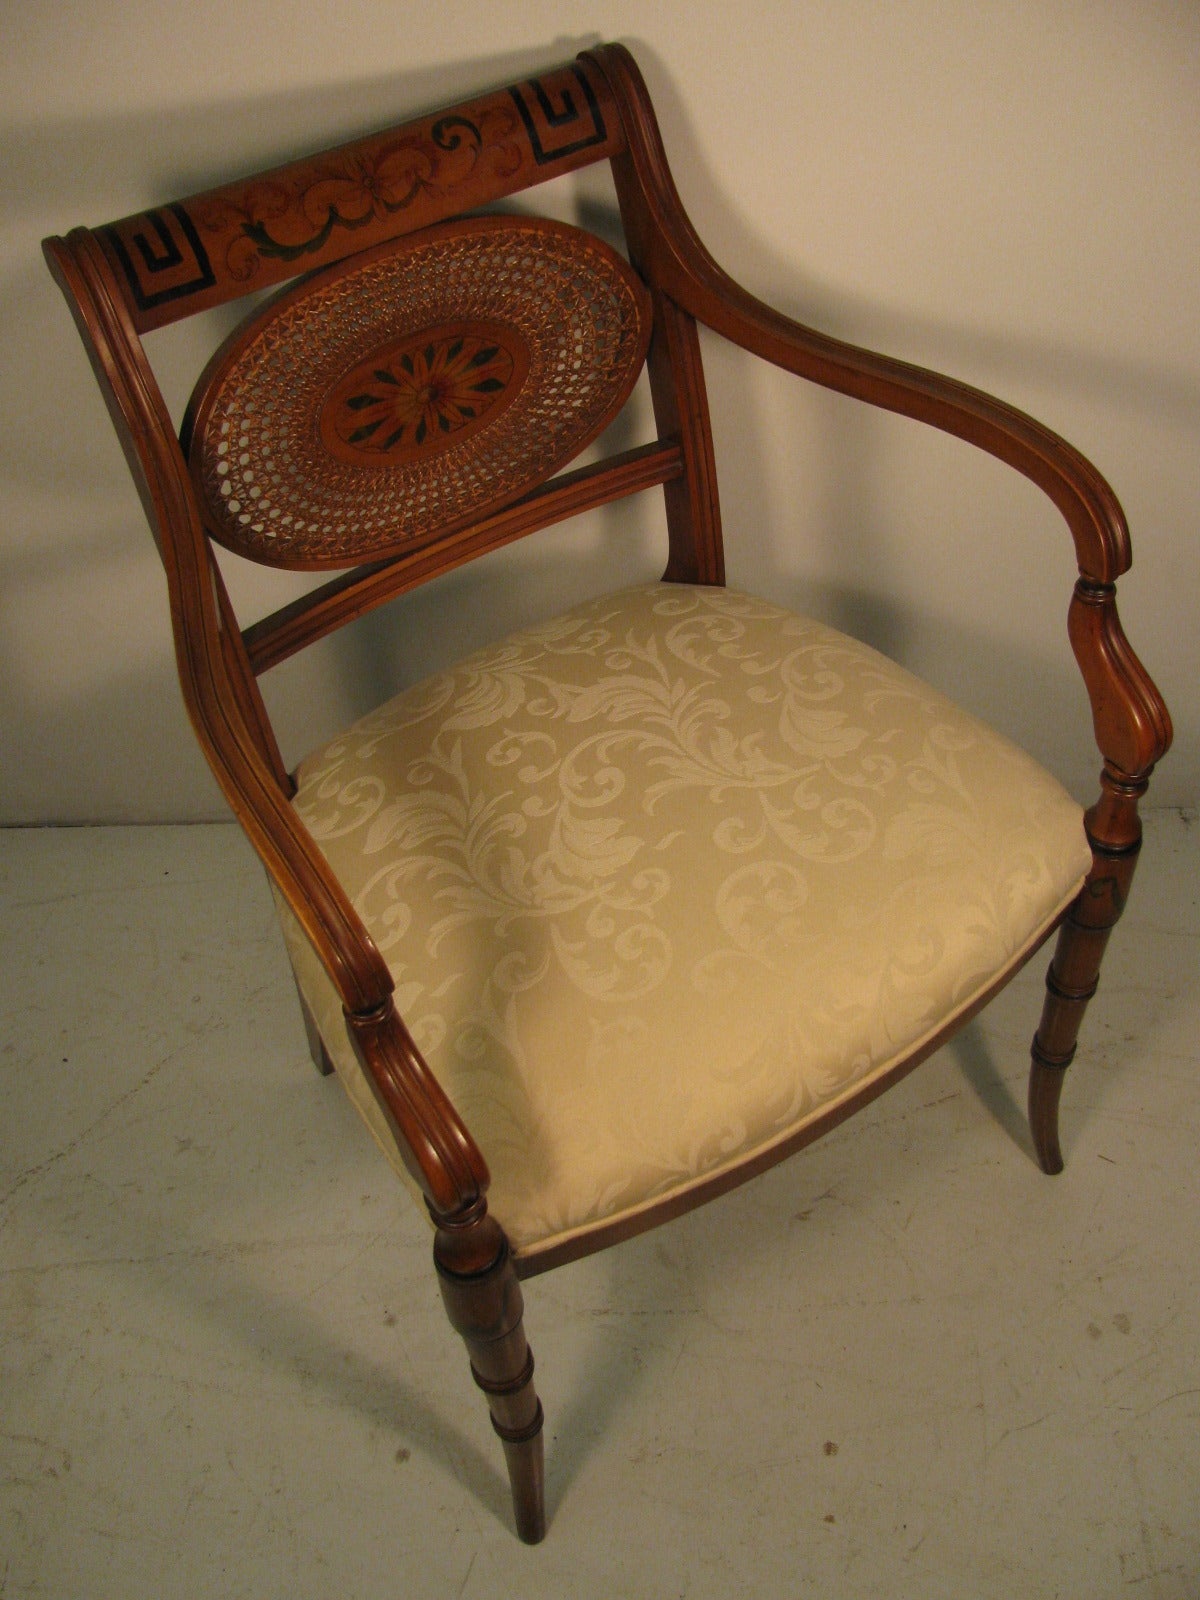 Beautiful and elegant pair of caned oval back armchairs. Hand-painted crest and legs. Carved reeded legs with curved arms. Very well proportioned. Reupholstered seats in a period style damask. A quality pair in every manner. In excellent vintage